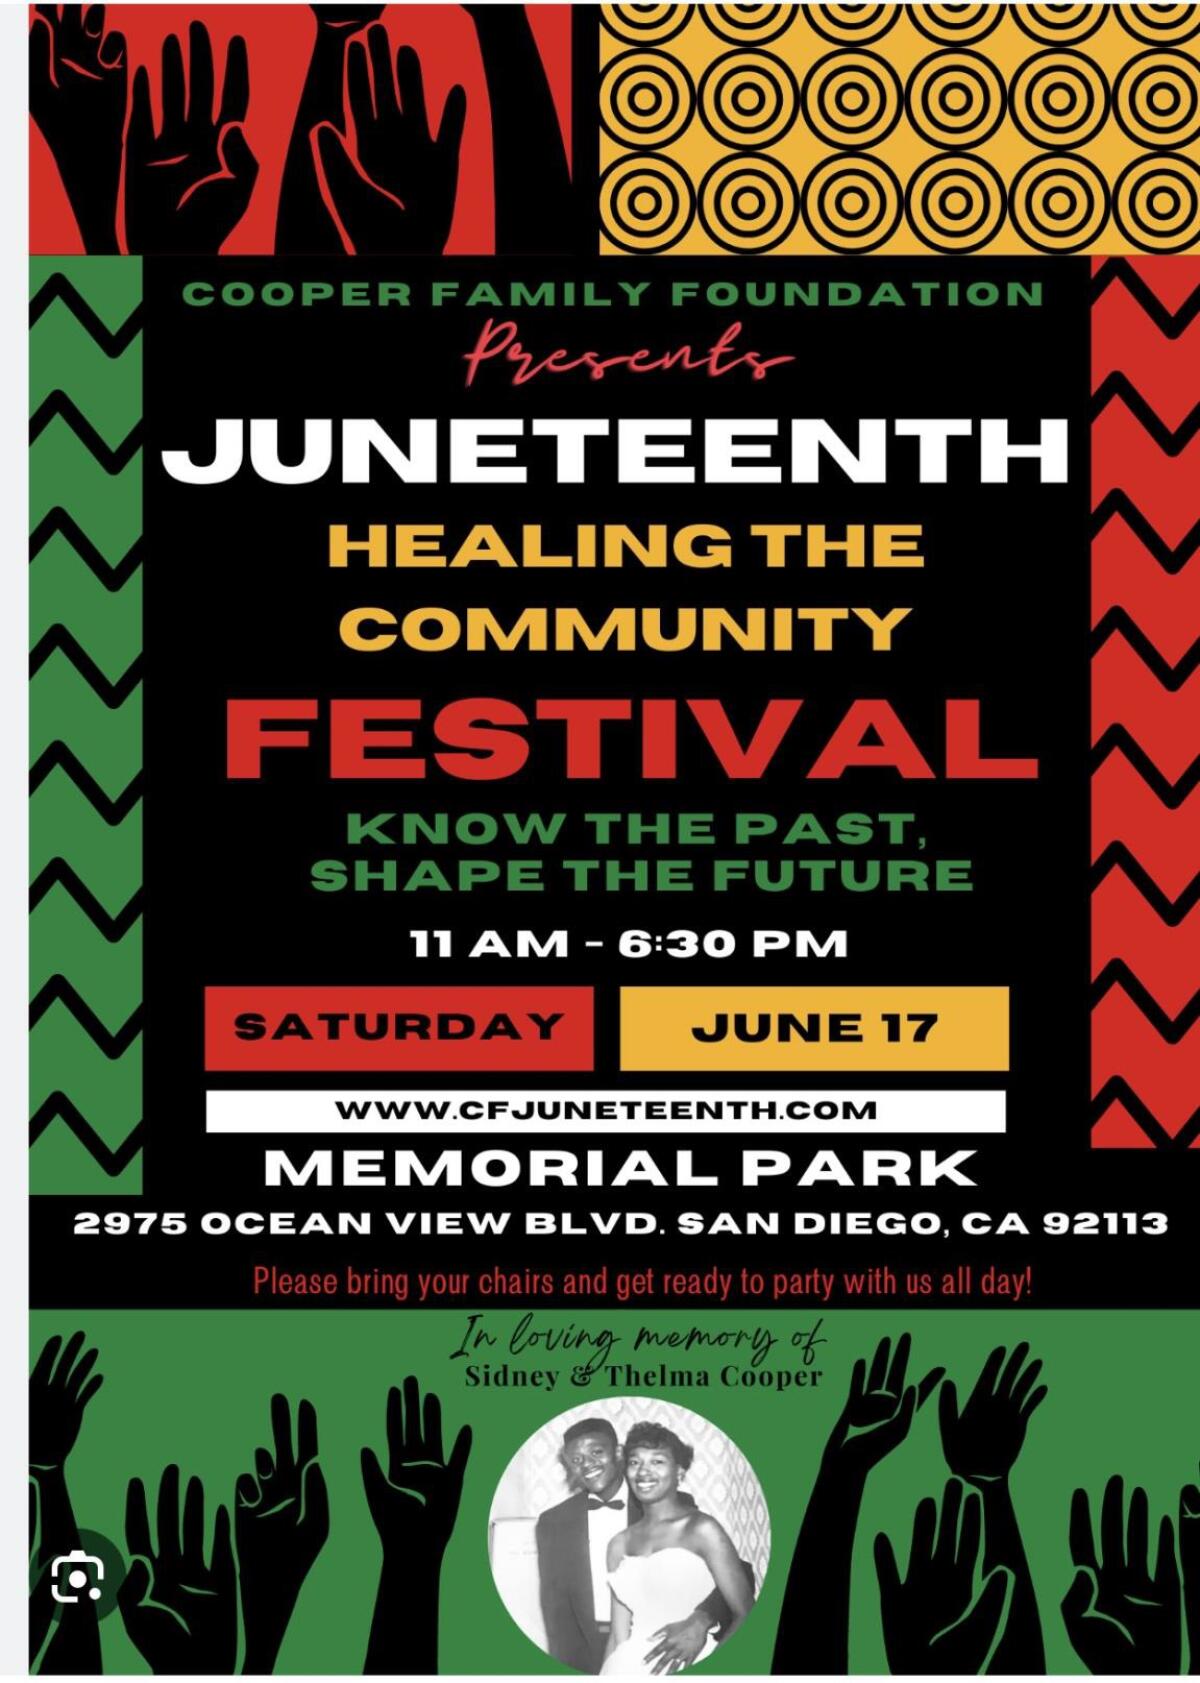 Red, yellow and green advertisement for the Cooper Family Foundation Juneteenth Freedom Festival.